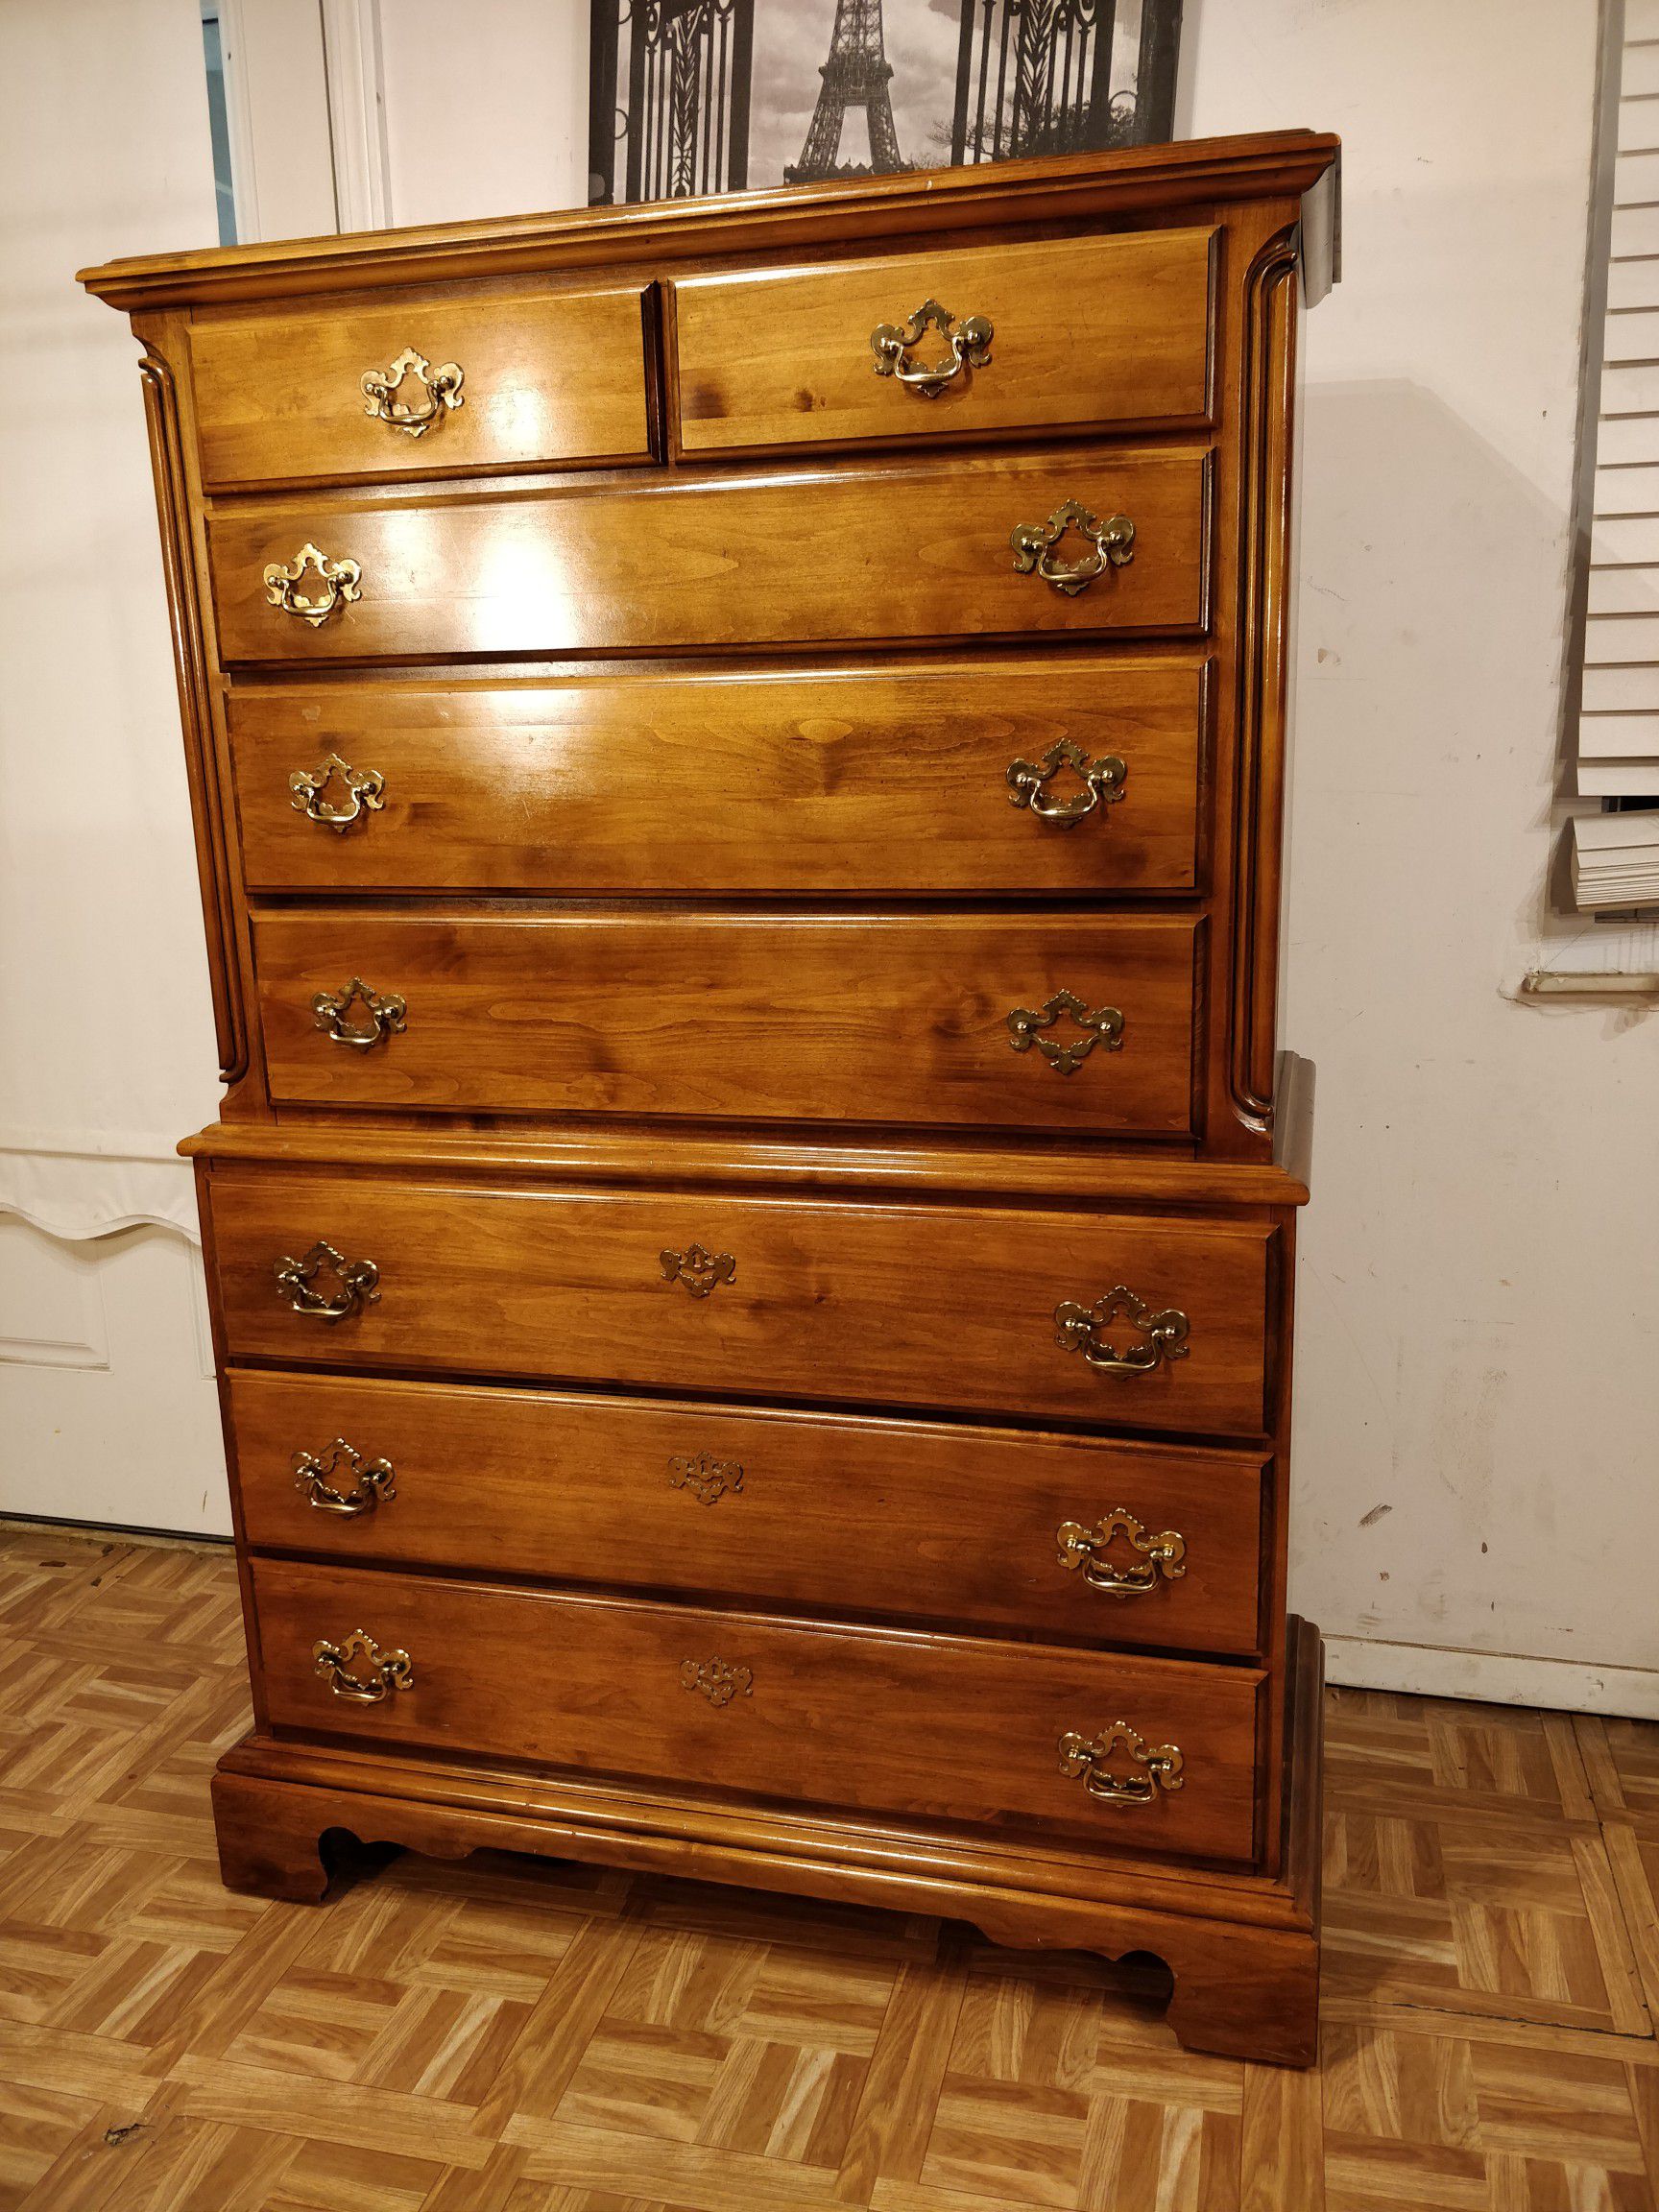 Nice solid wood big tall boy chest dresser with 8 drawers in great shape , all drawers working well. L40"*W19"*H58"